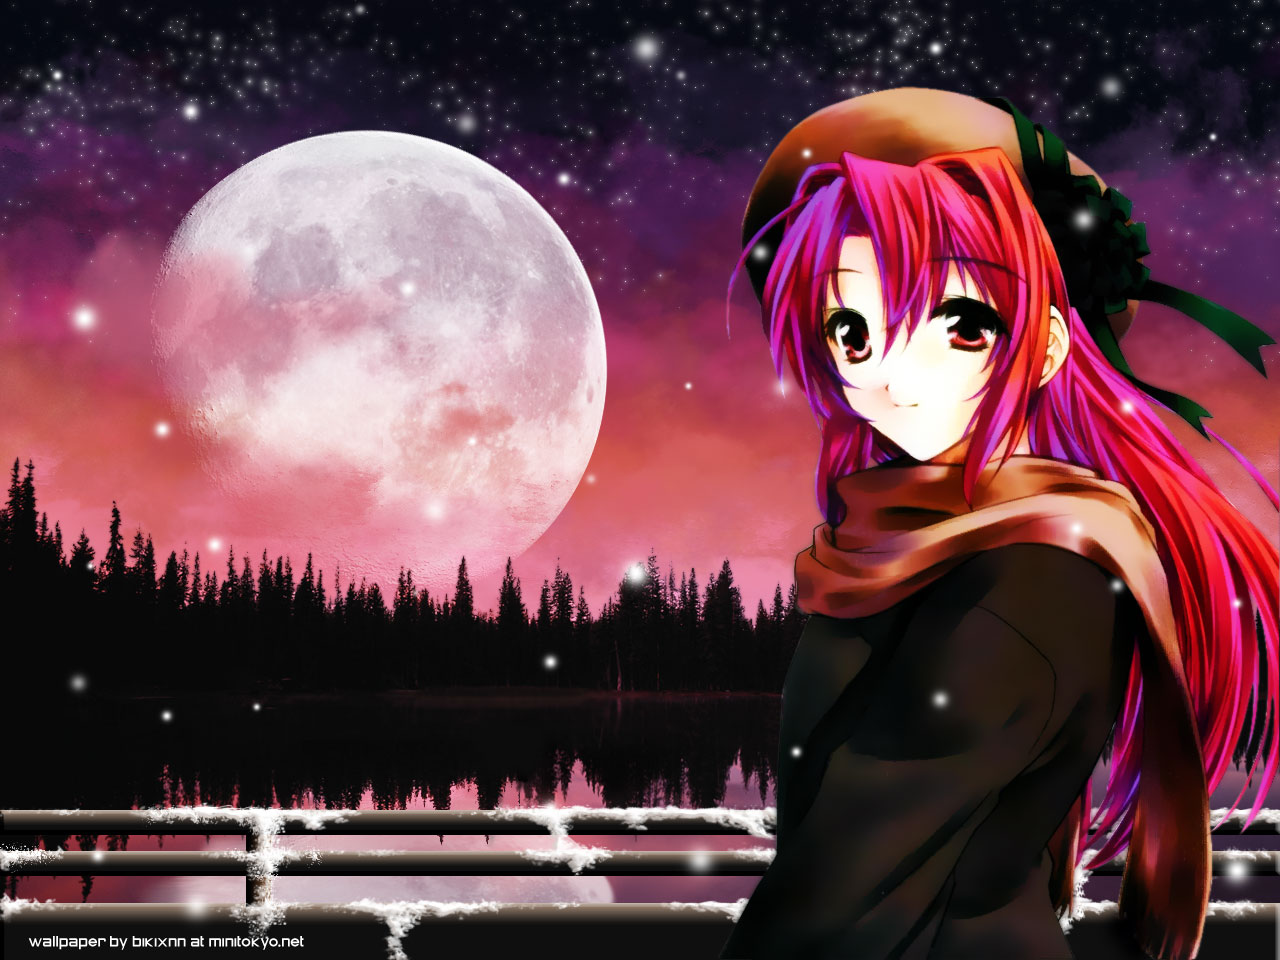 99 Elfen Lied HD Wallpapers | Backgrounds - Wallpaper Abyss - Page 3